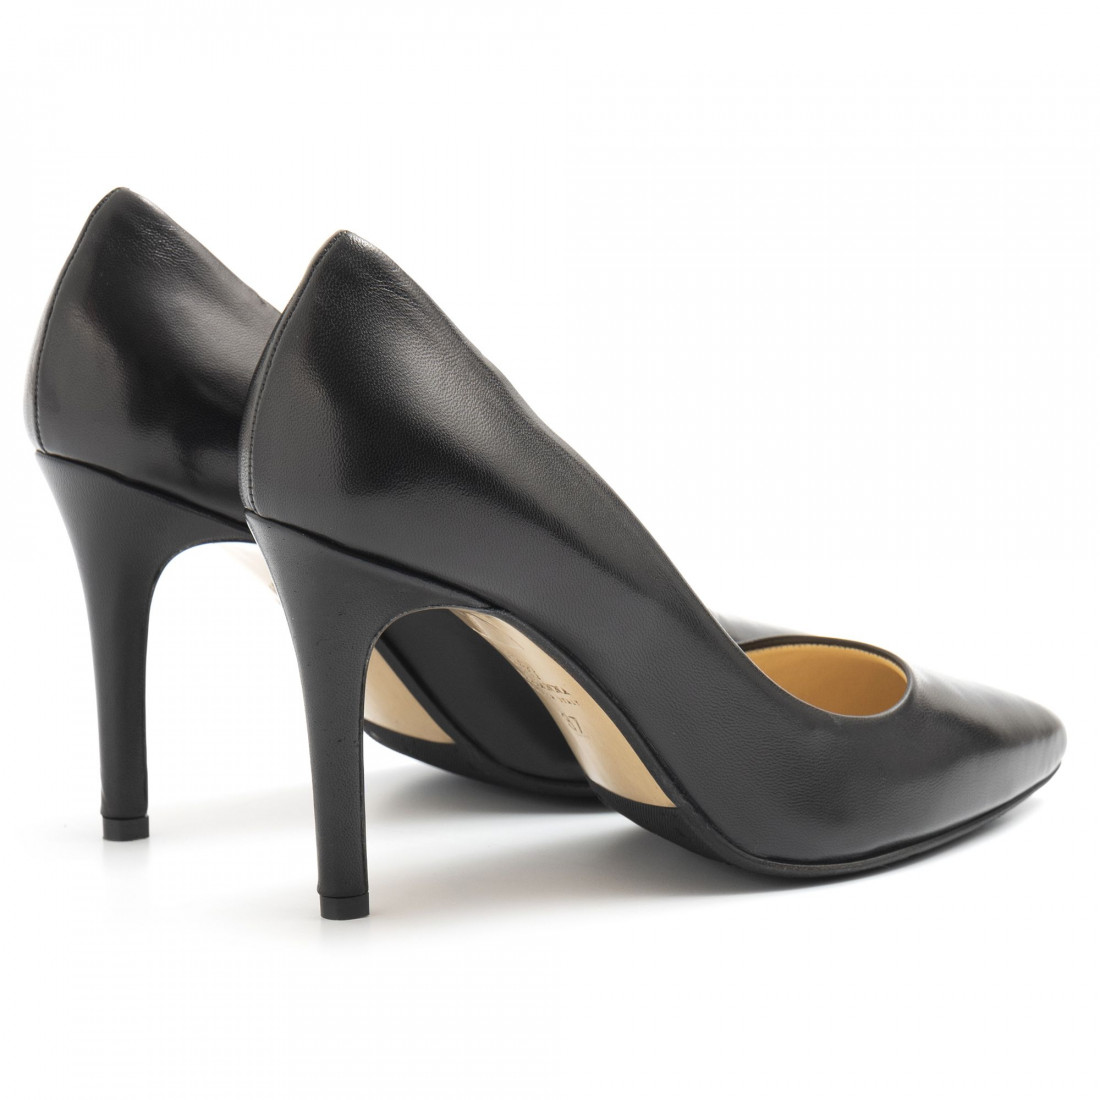 Black soft leather L'Arianna pump with high heel